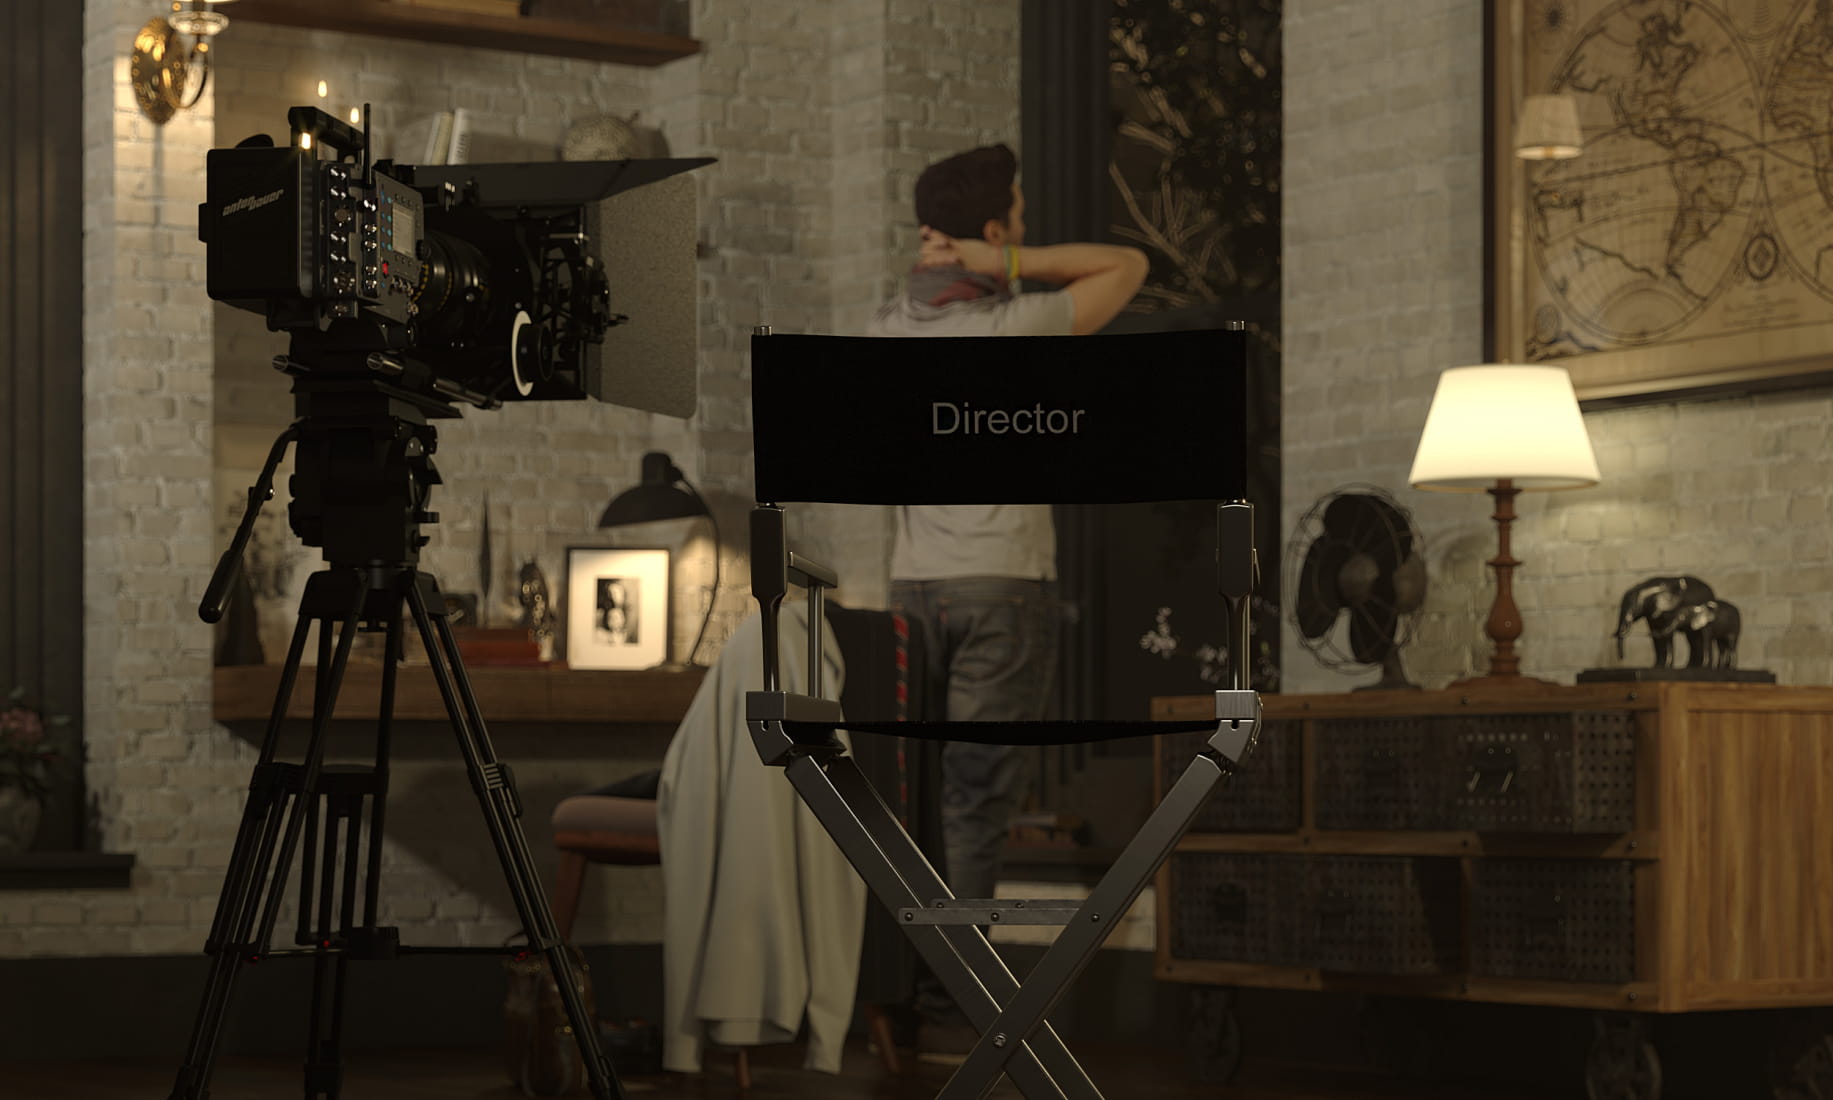 be-director-of-your-life